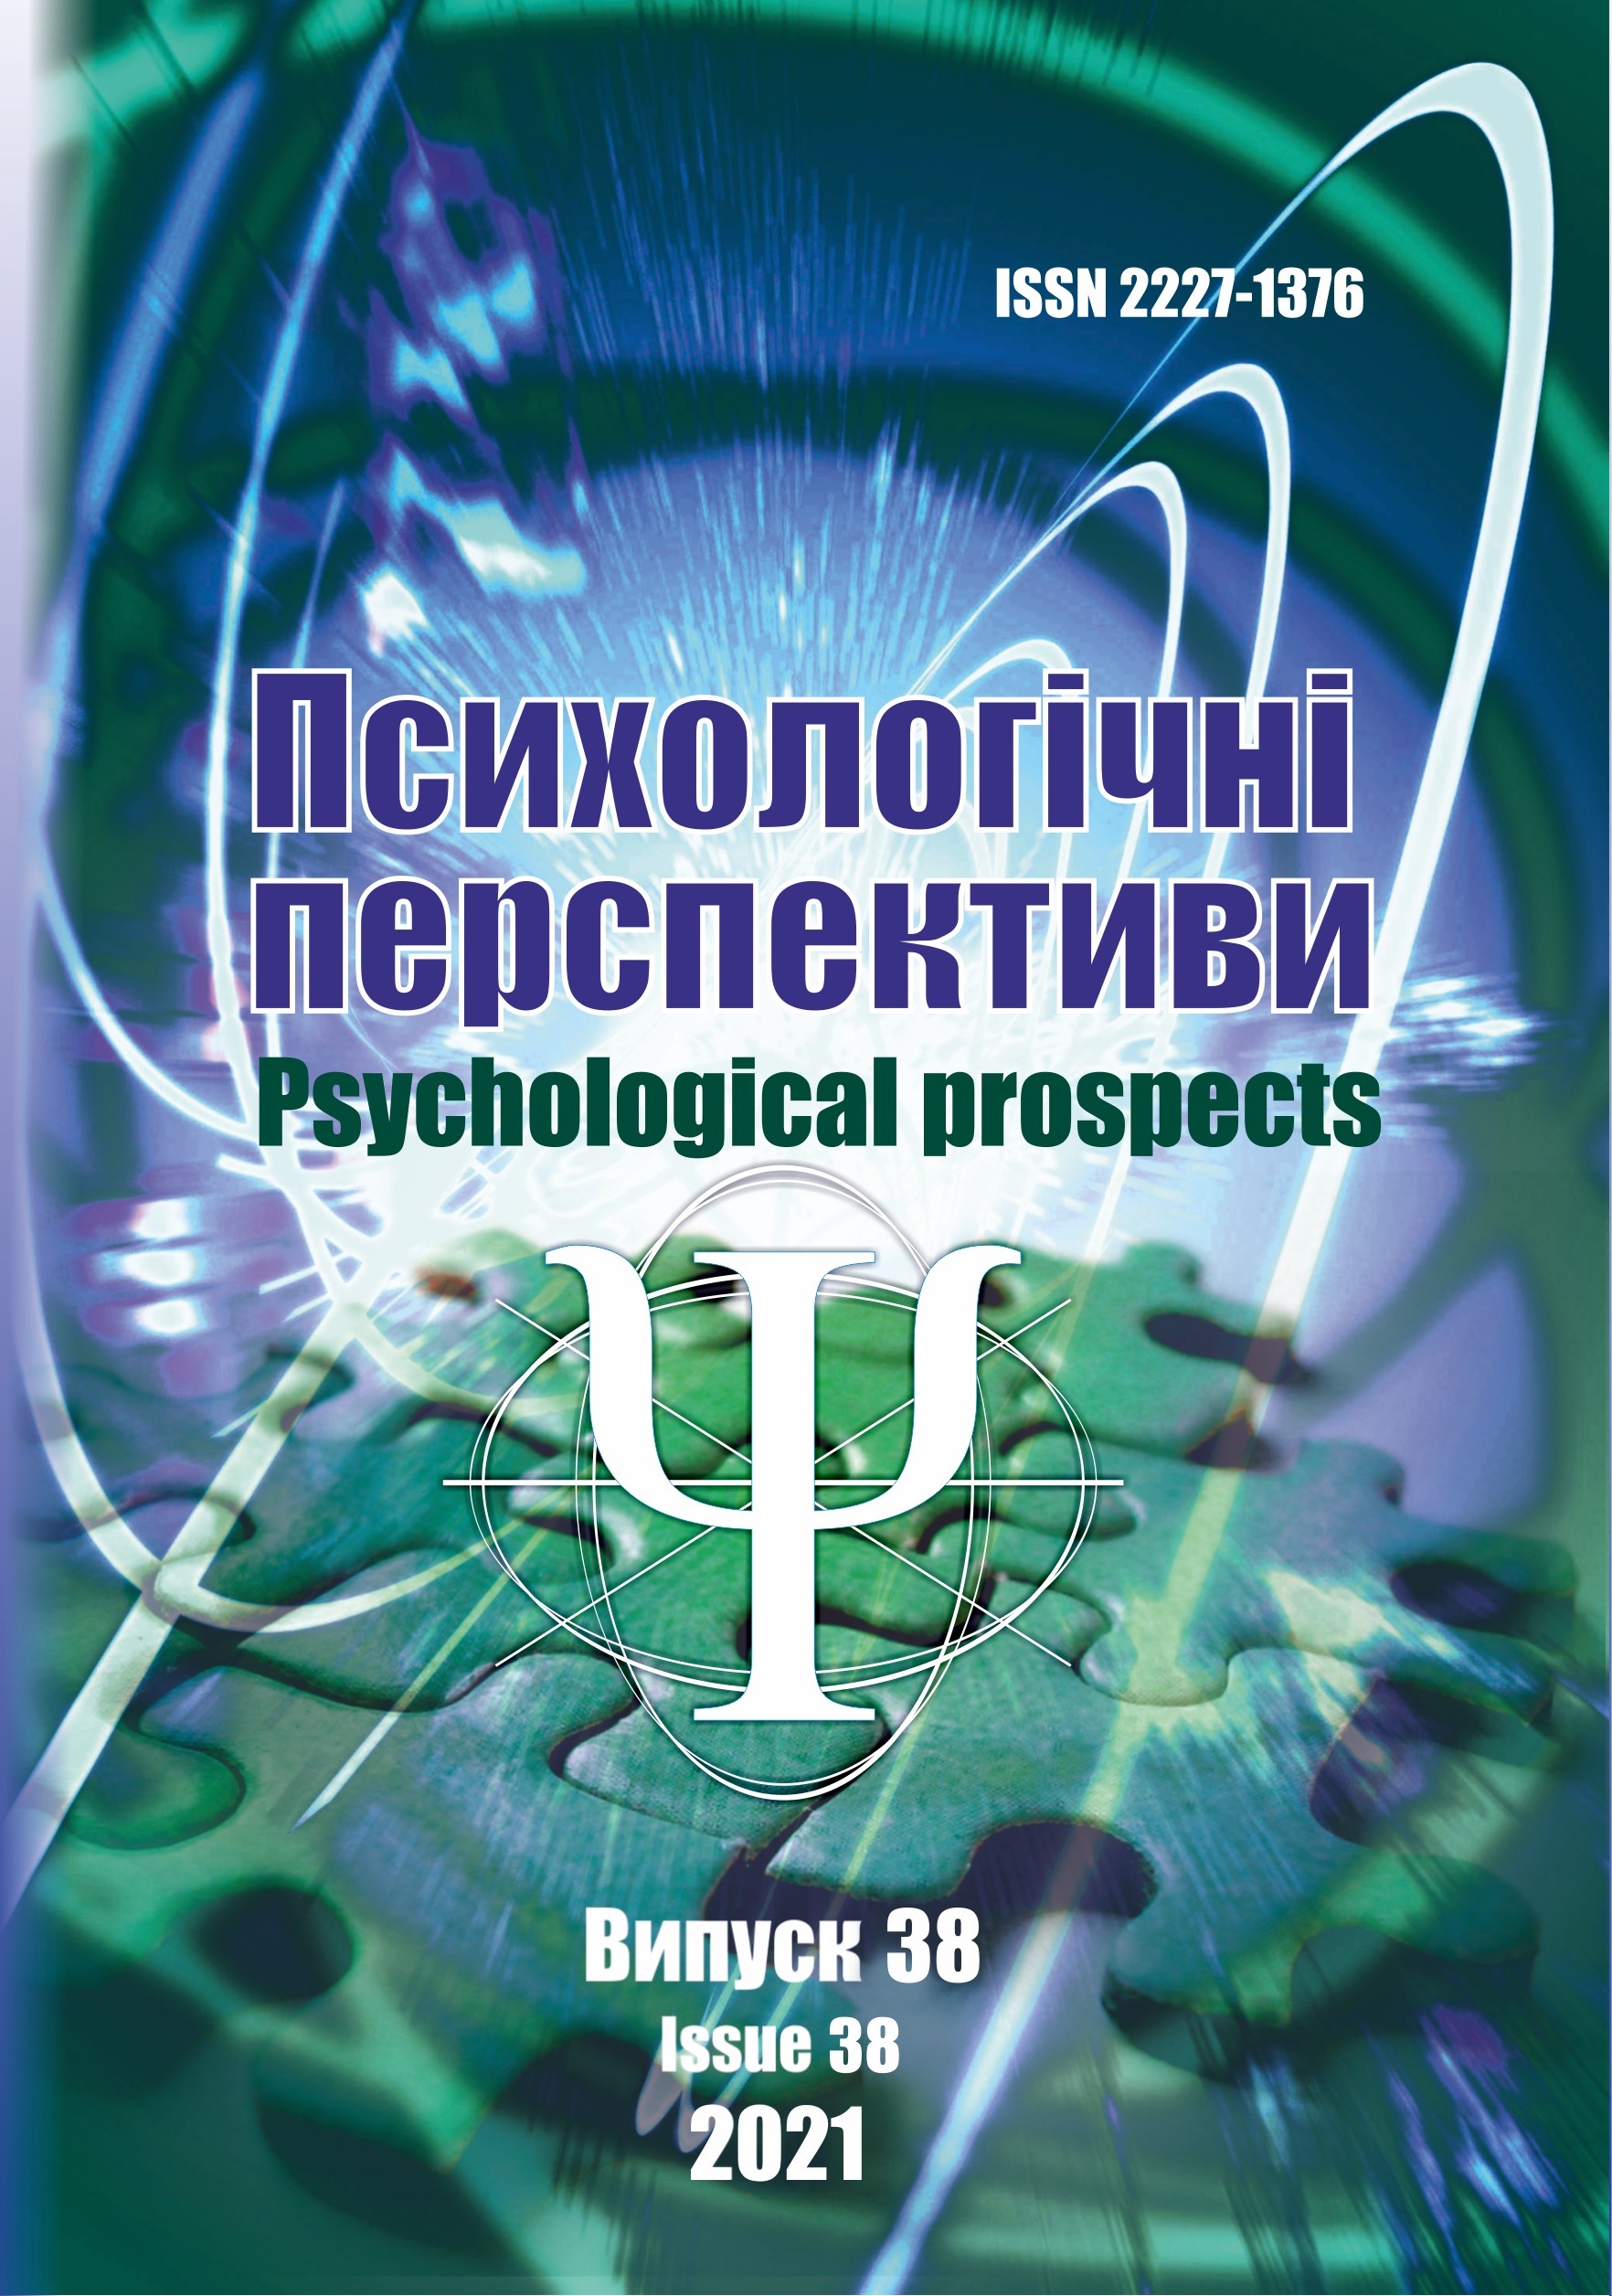 					View No. 38 (2021): Psychological Prospects Journal
				